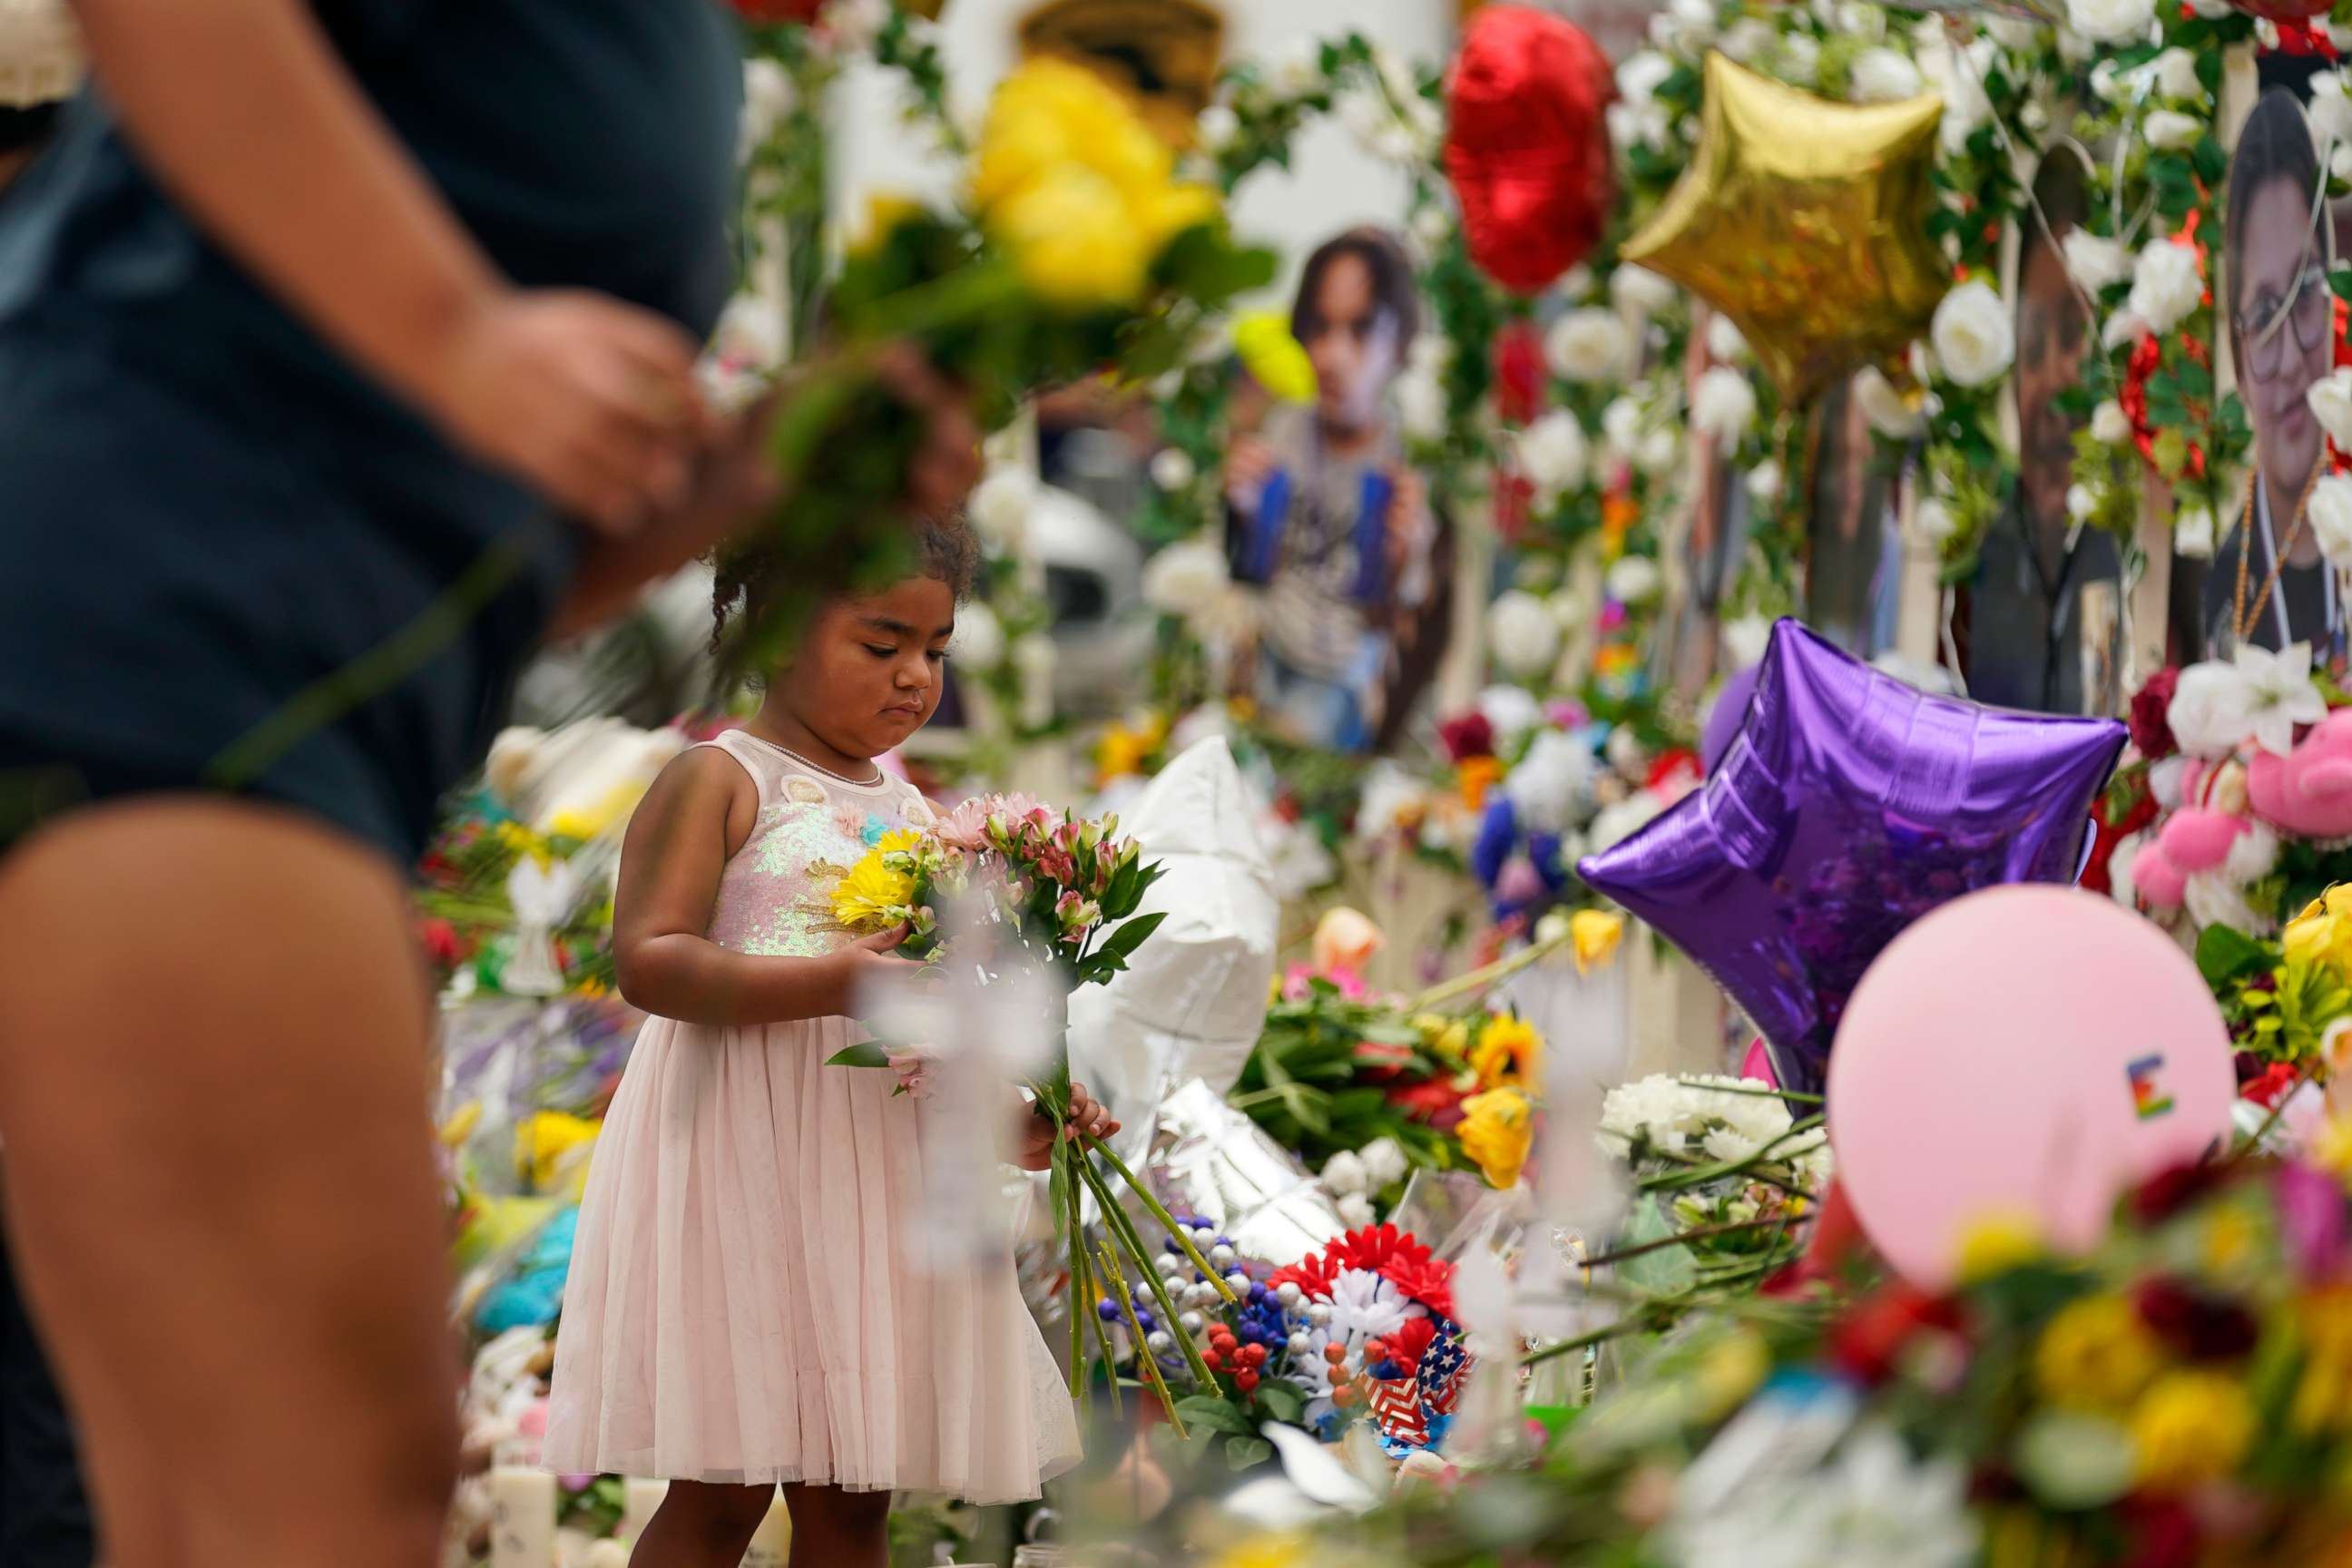 PHOTO: A young visitor brings flowers to a memorial as for the victims killed in last week's Robb Elementary School shooting, May 31, 2022, in Uvalde, Texas.